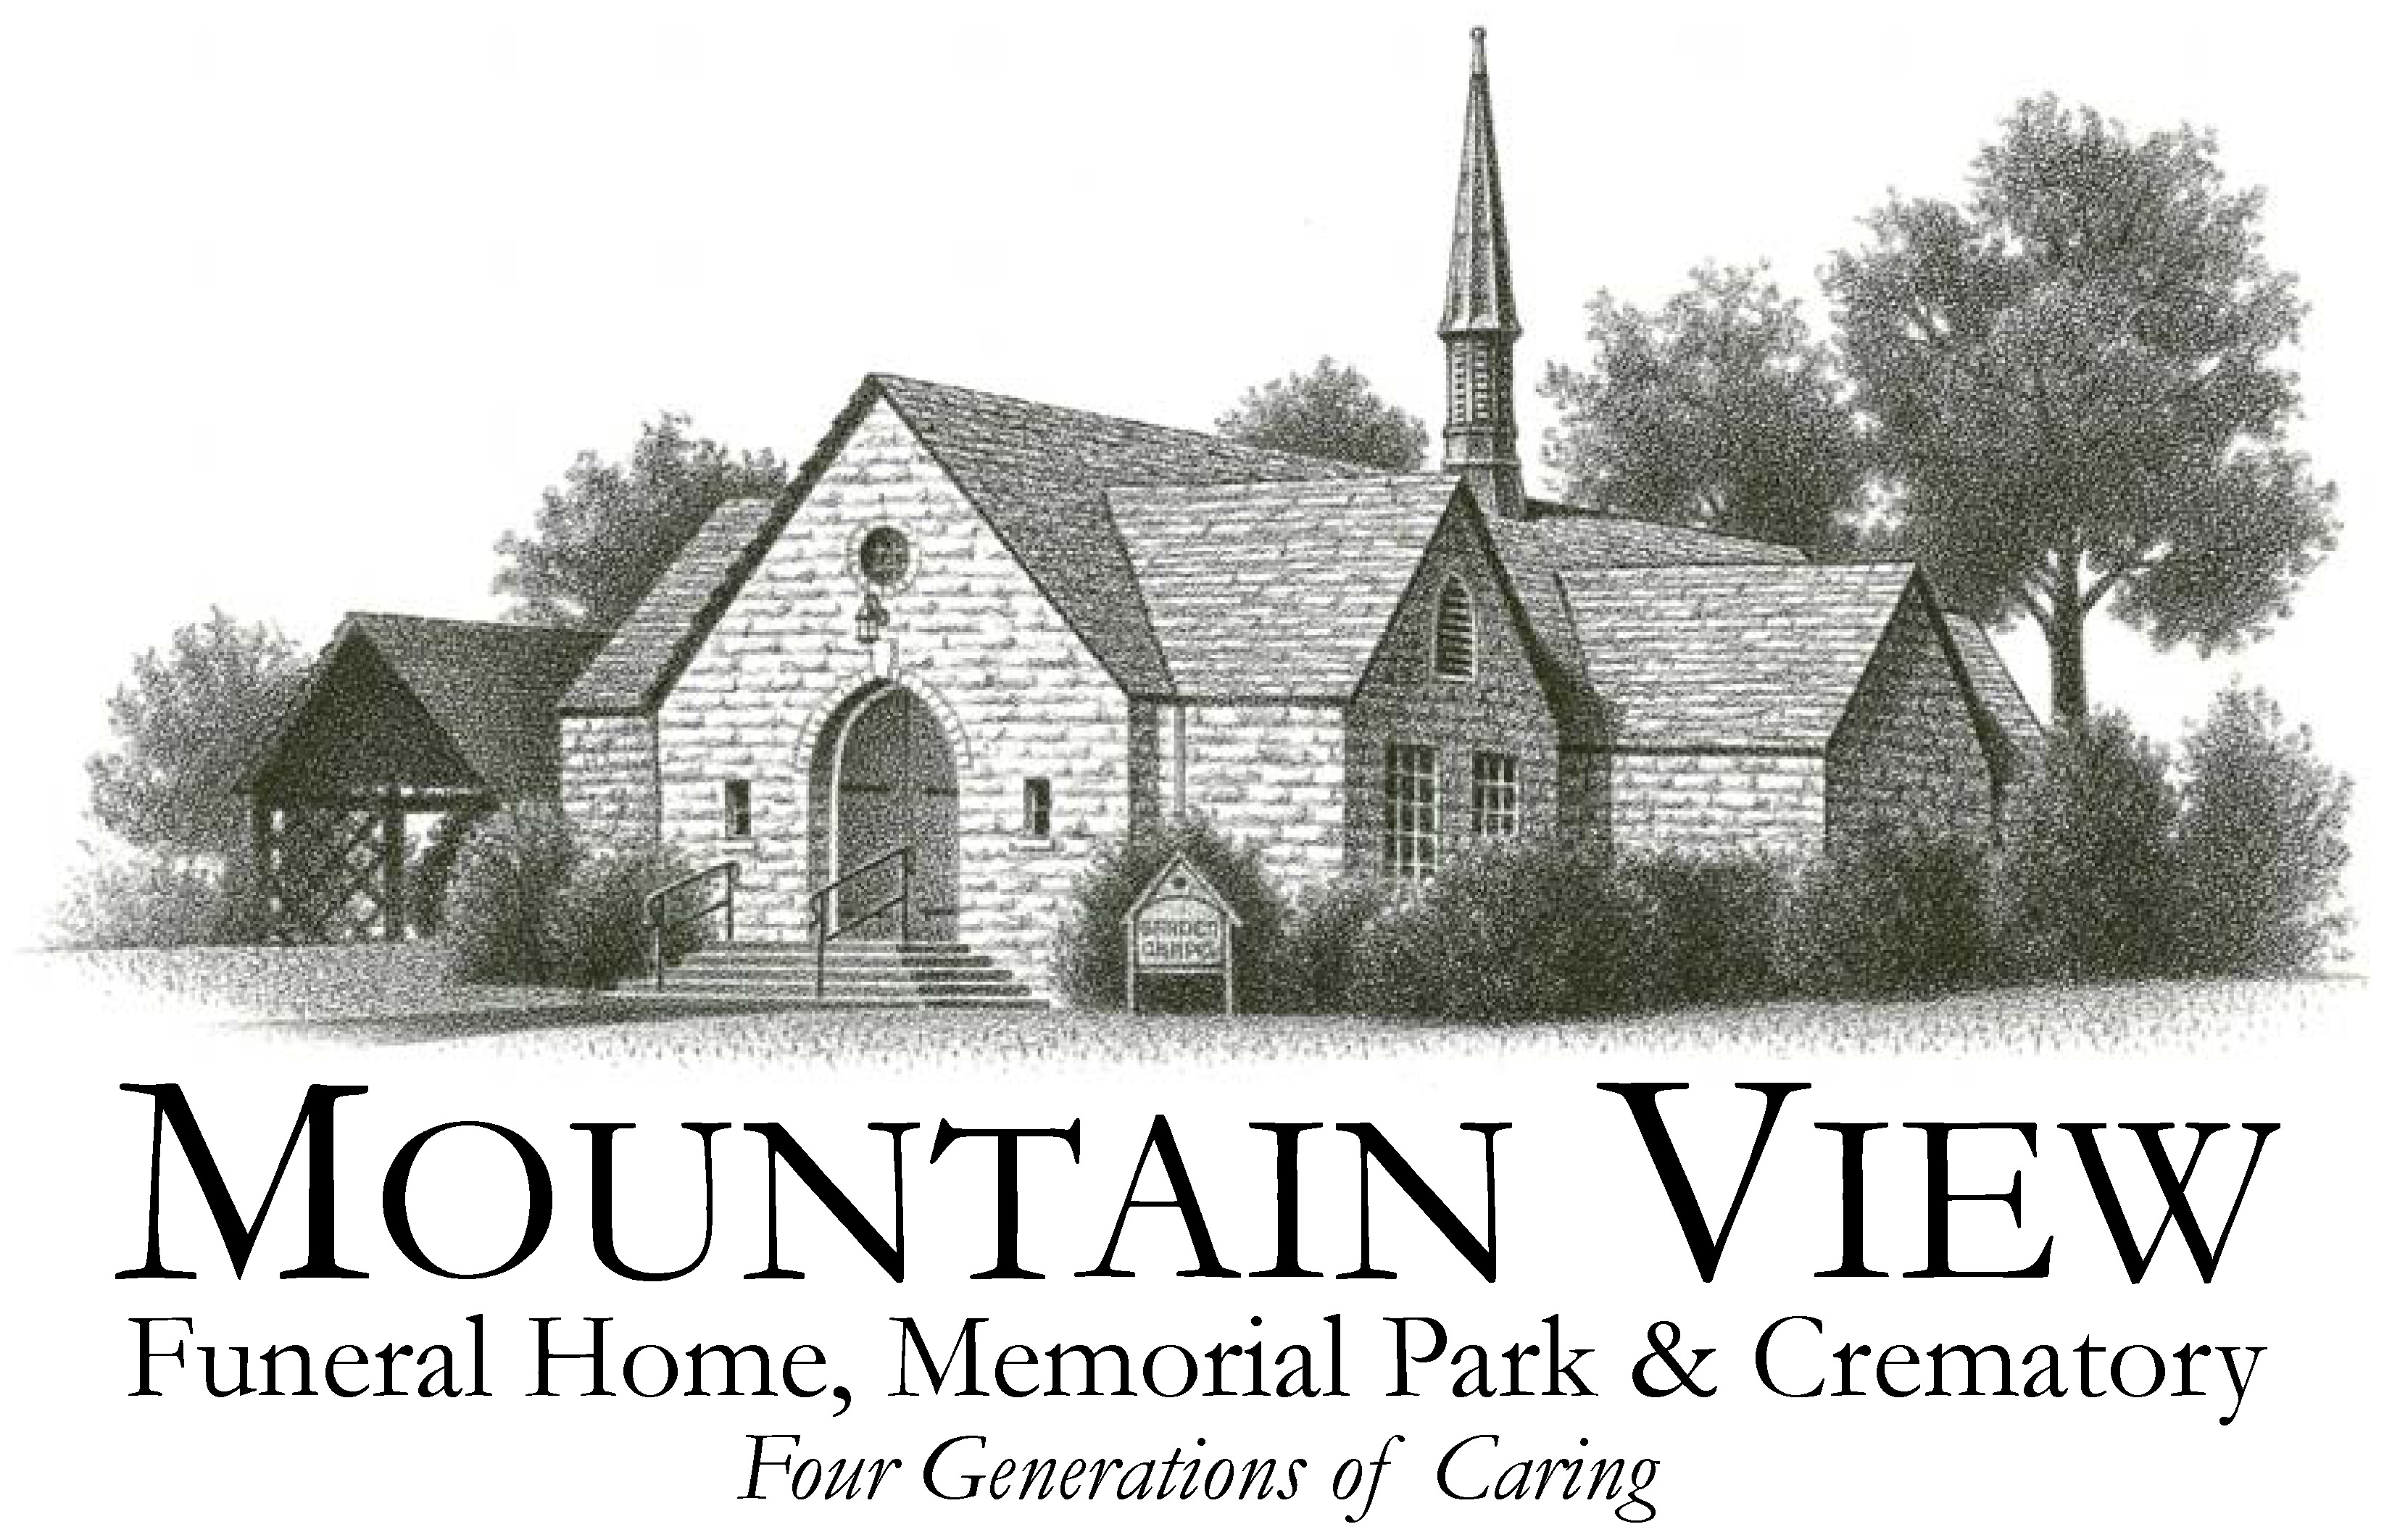 Mountain View Funeral Home, Memorial Park & Crematory